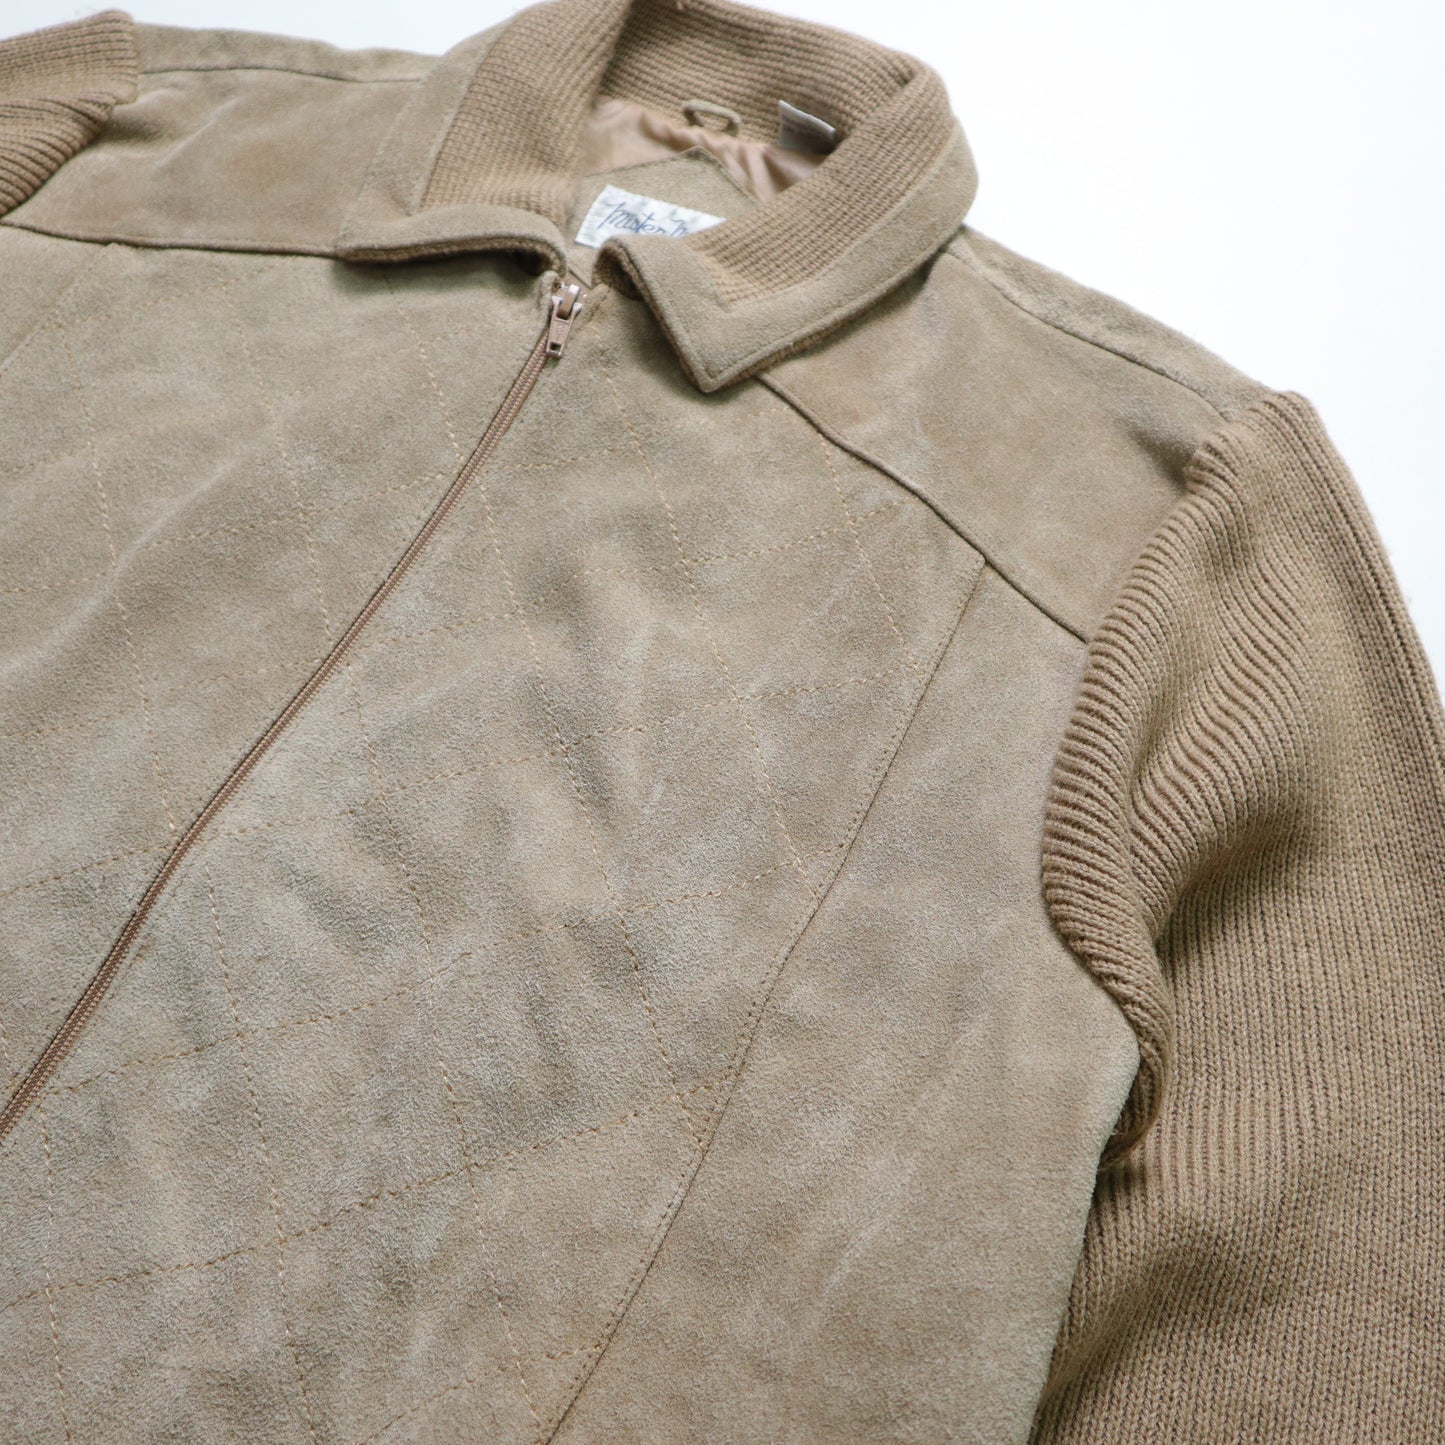 1980s khaki diamond suede jacket with different materials